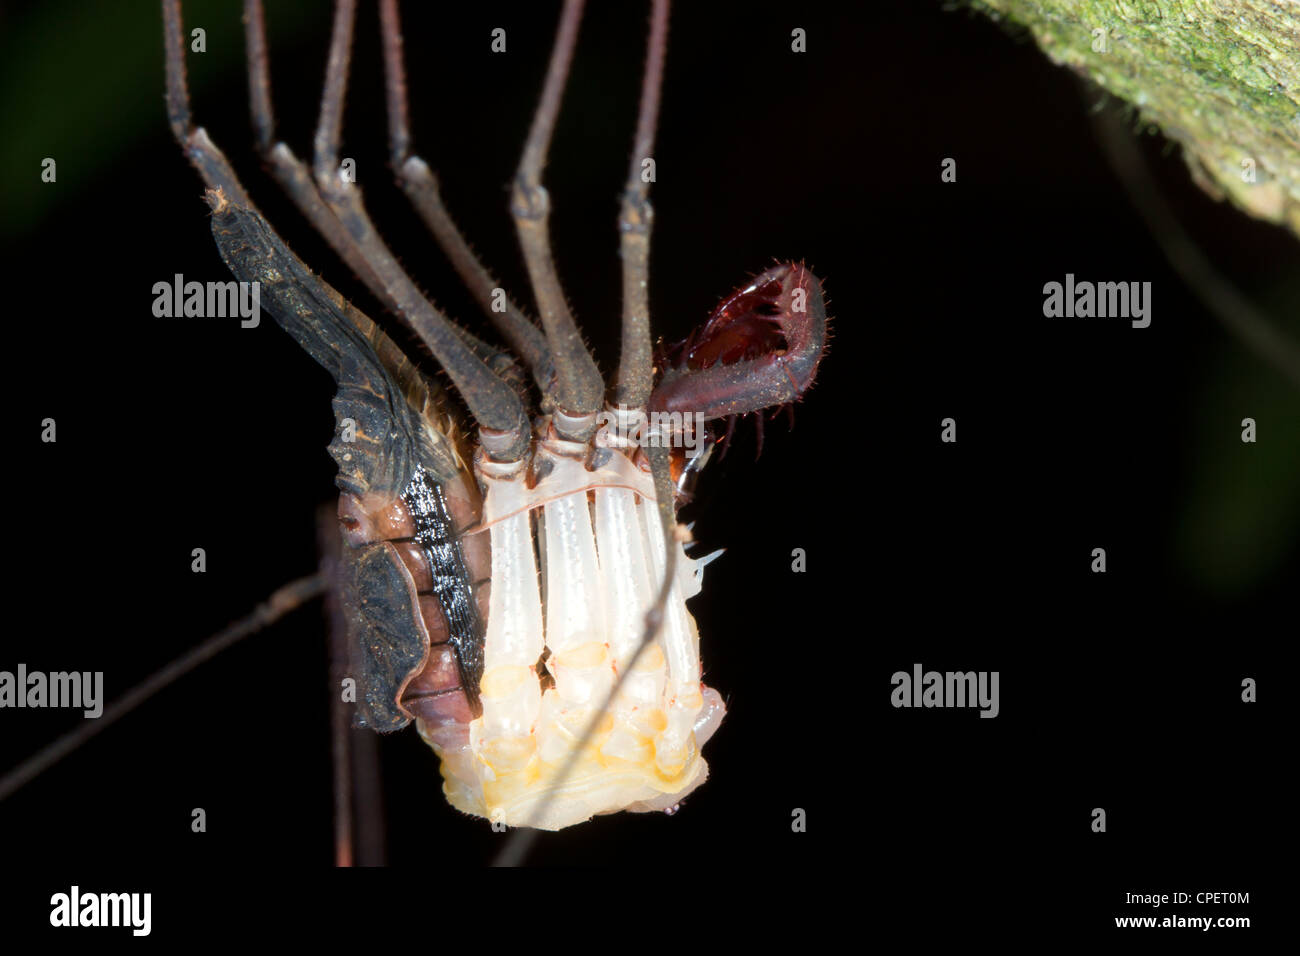 Tail-less whipscorpion shedding its skin Stock Photo